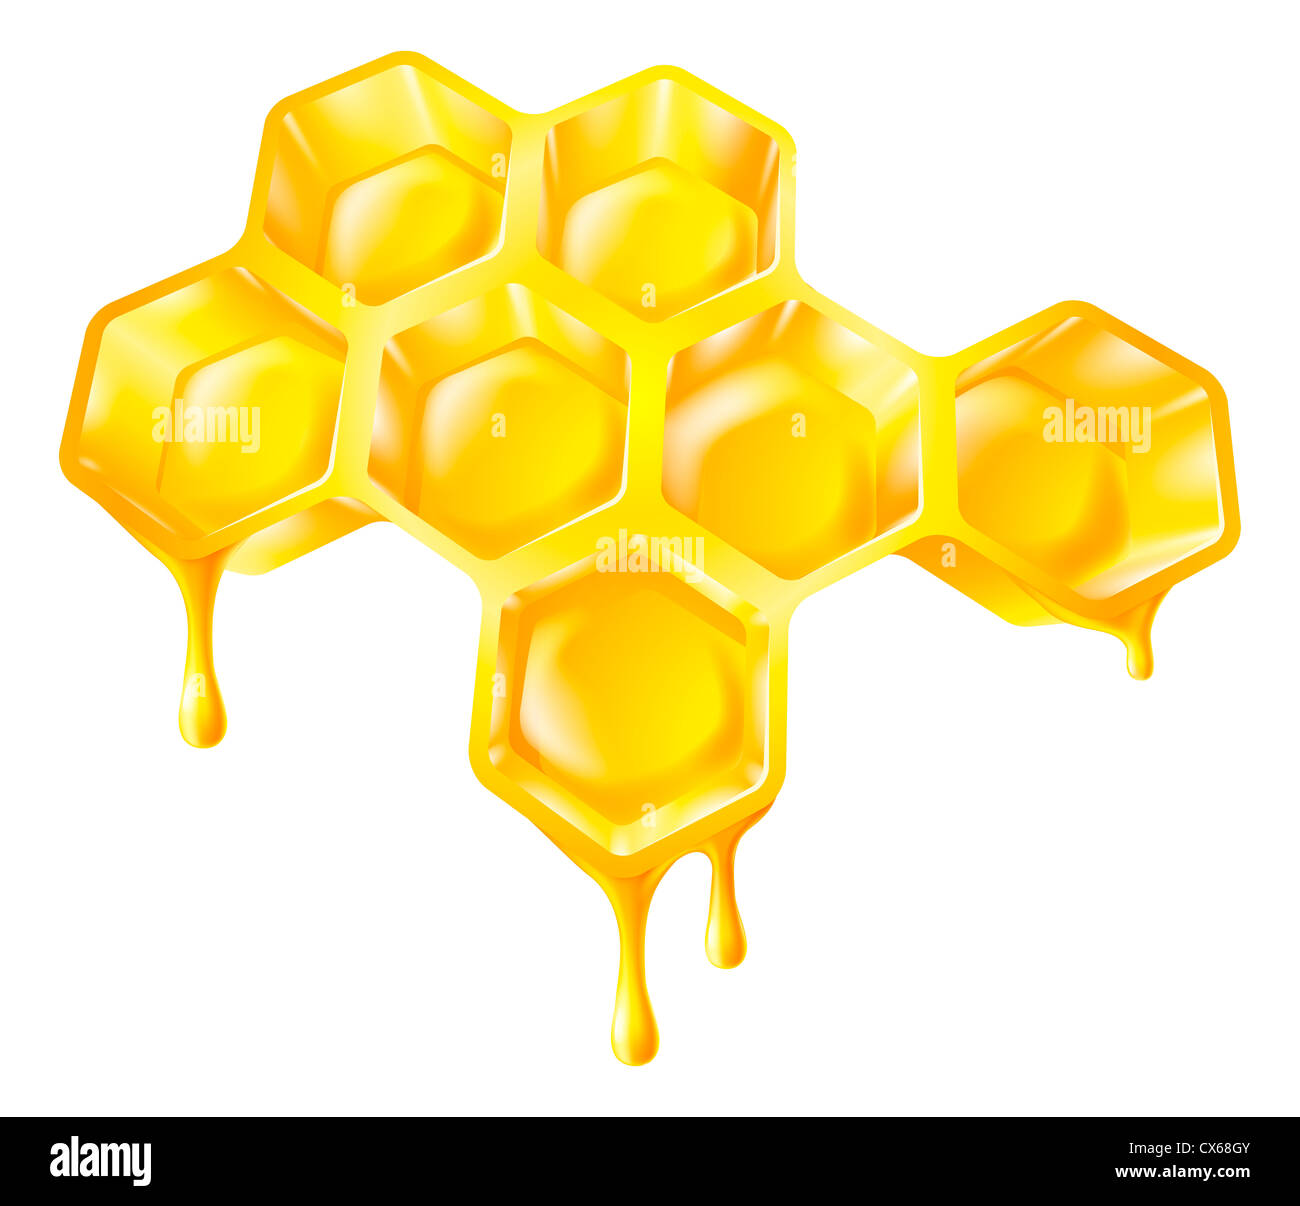 Illustration of bee's honeycomb with honey dripping off it Stock Photo